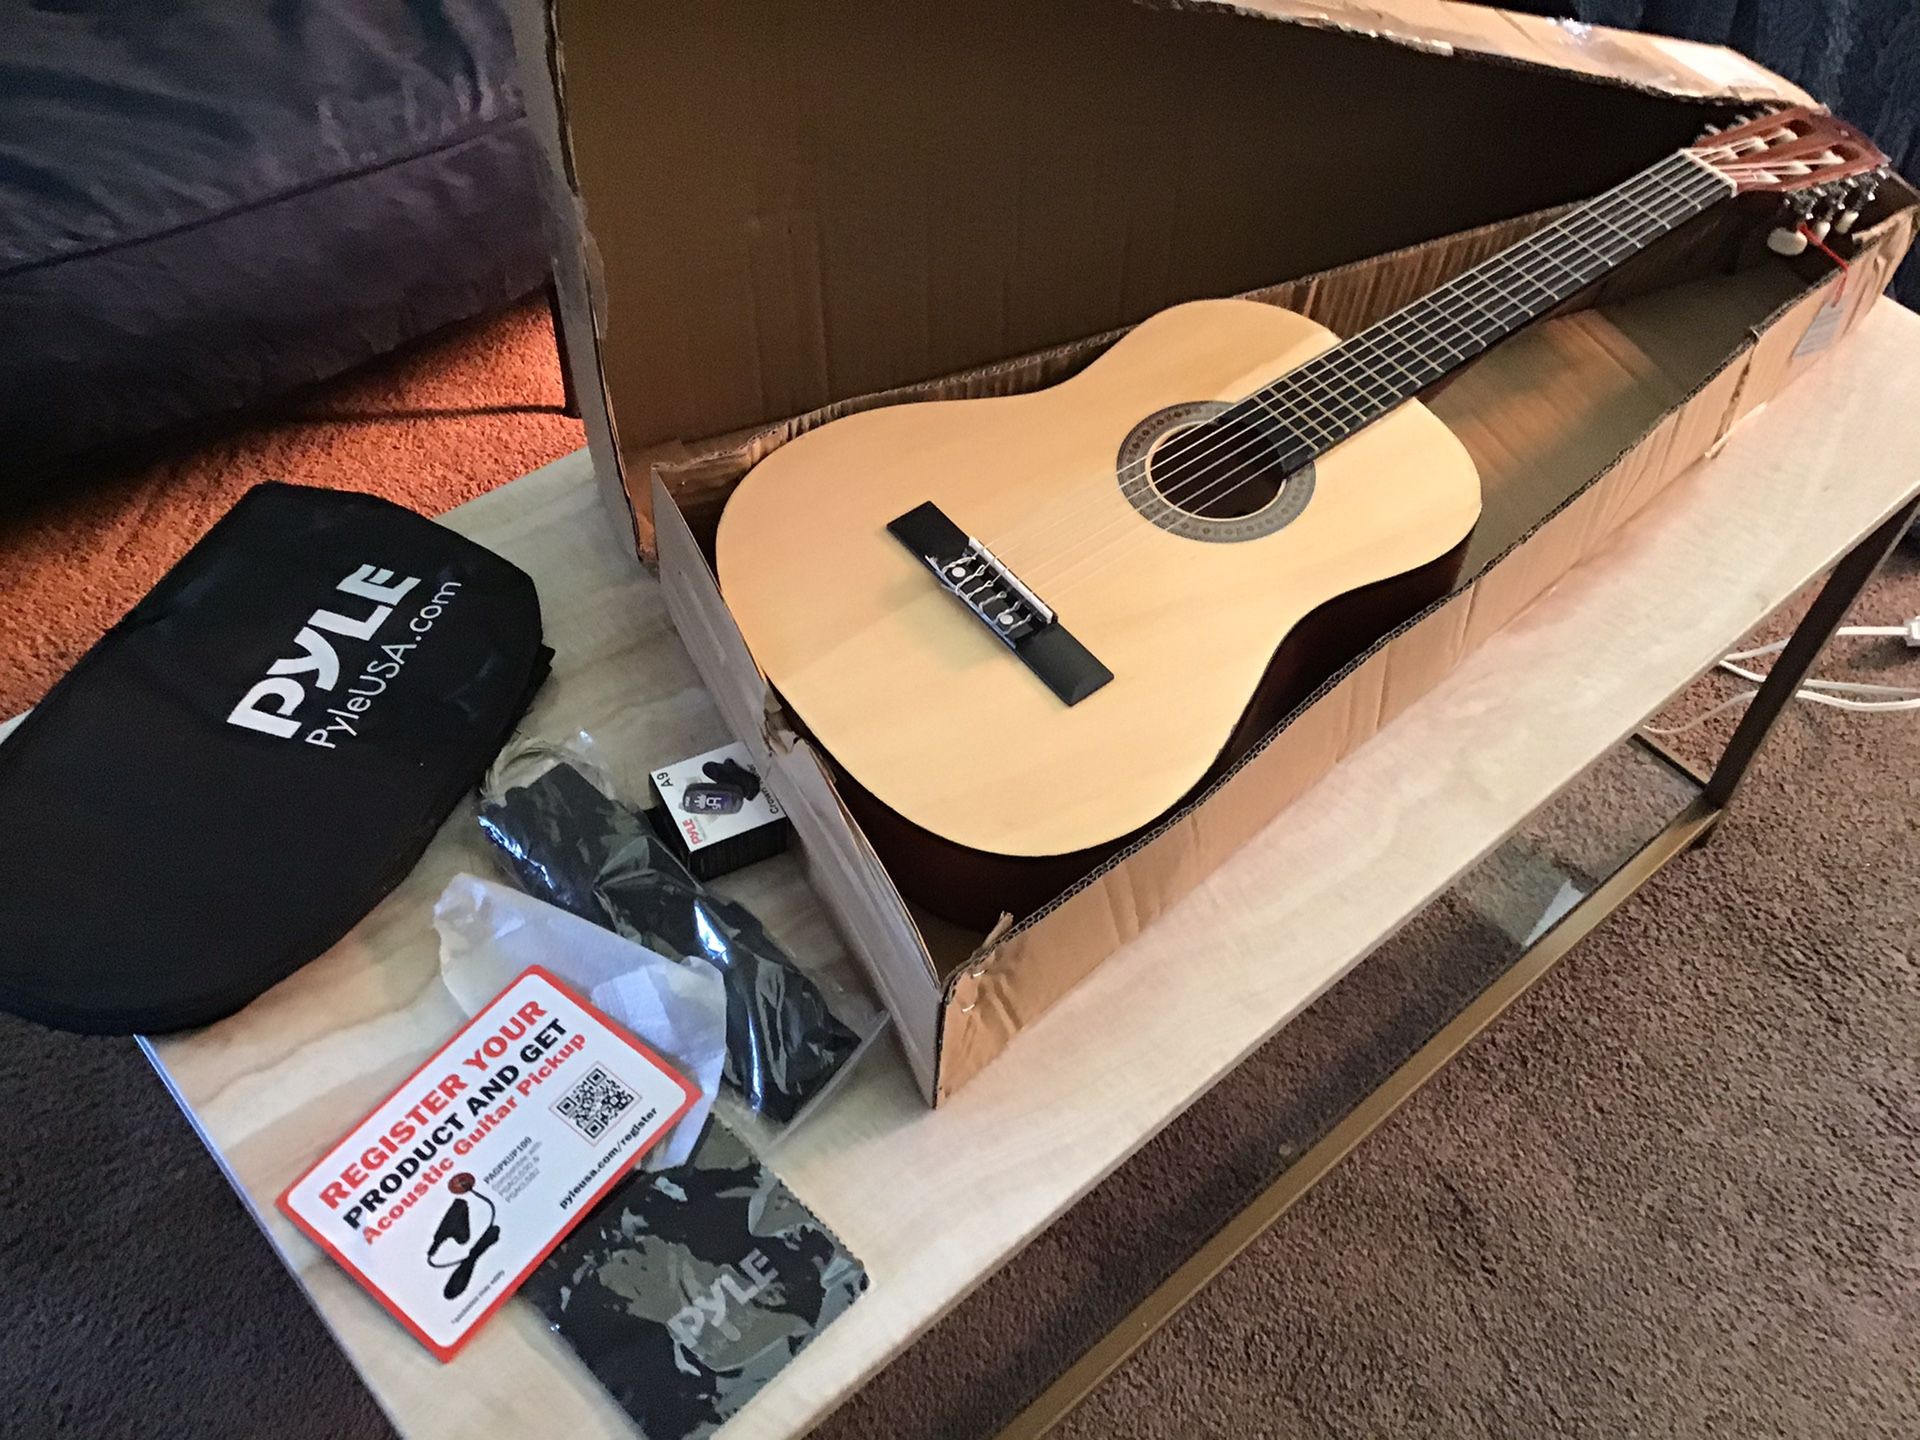 Pyle 30 “ Classical acoustic guitar Linden Wood traditional style with the wood slat board case bag nylon strap tuner three pics great for beginners